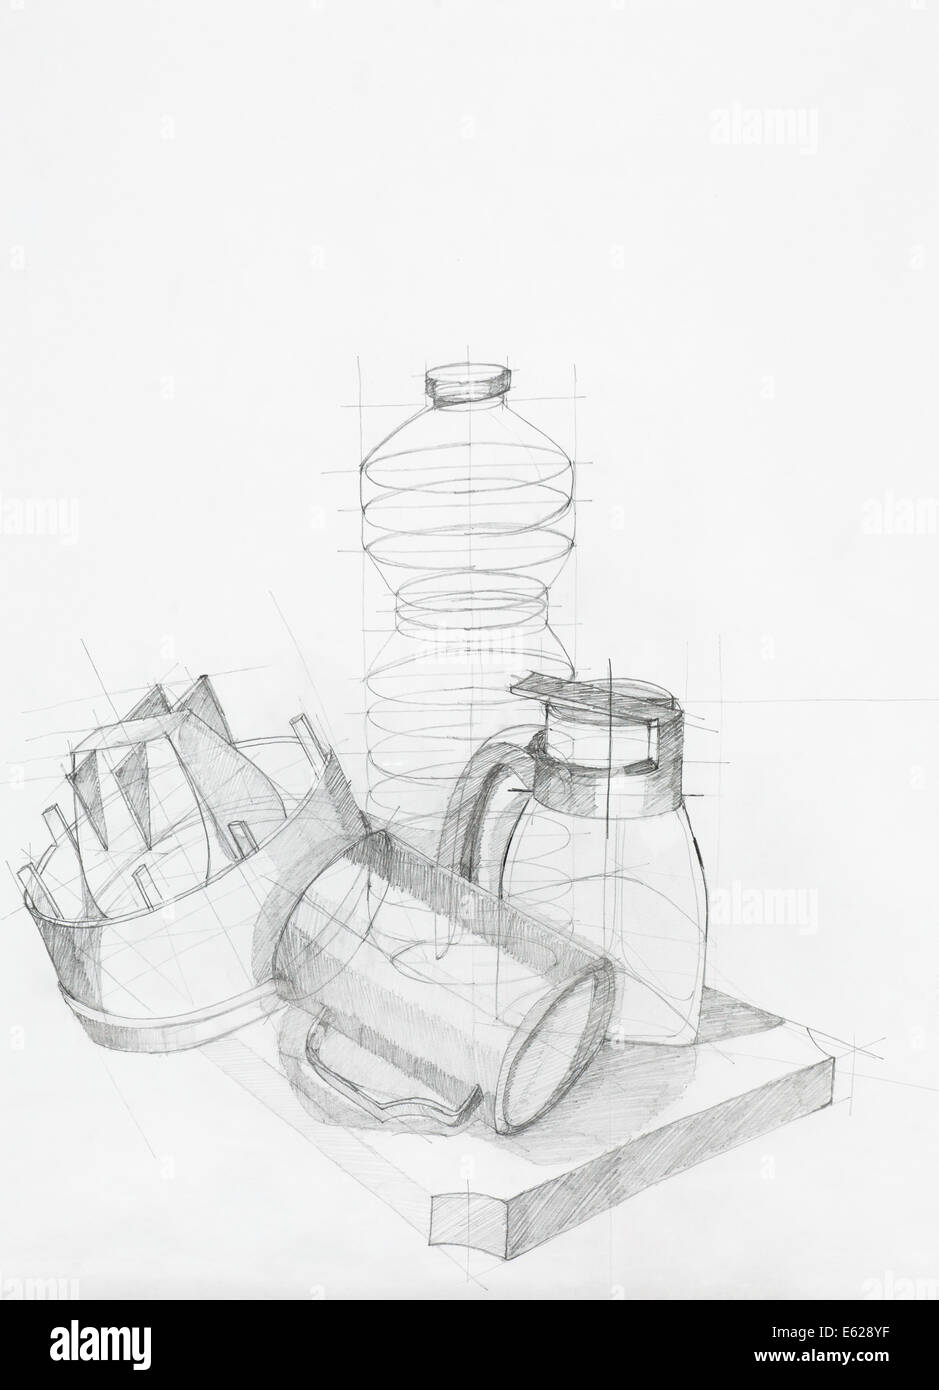 hand drawn sketch composition with objects, artistic study Stock Photo